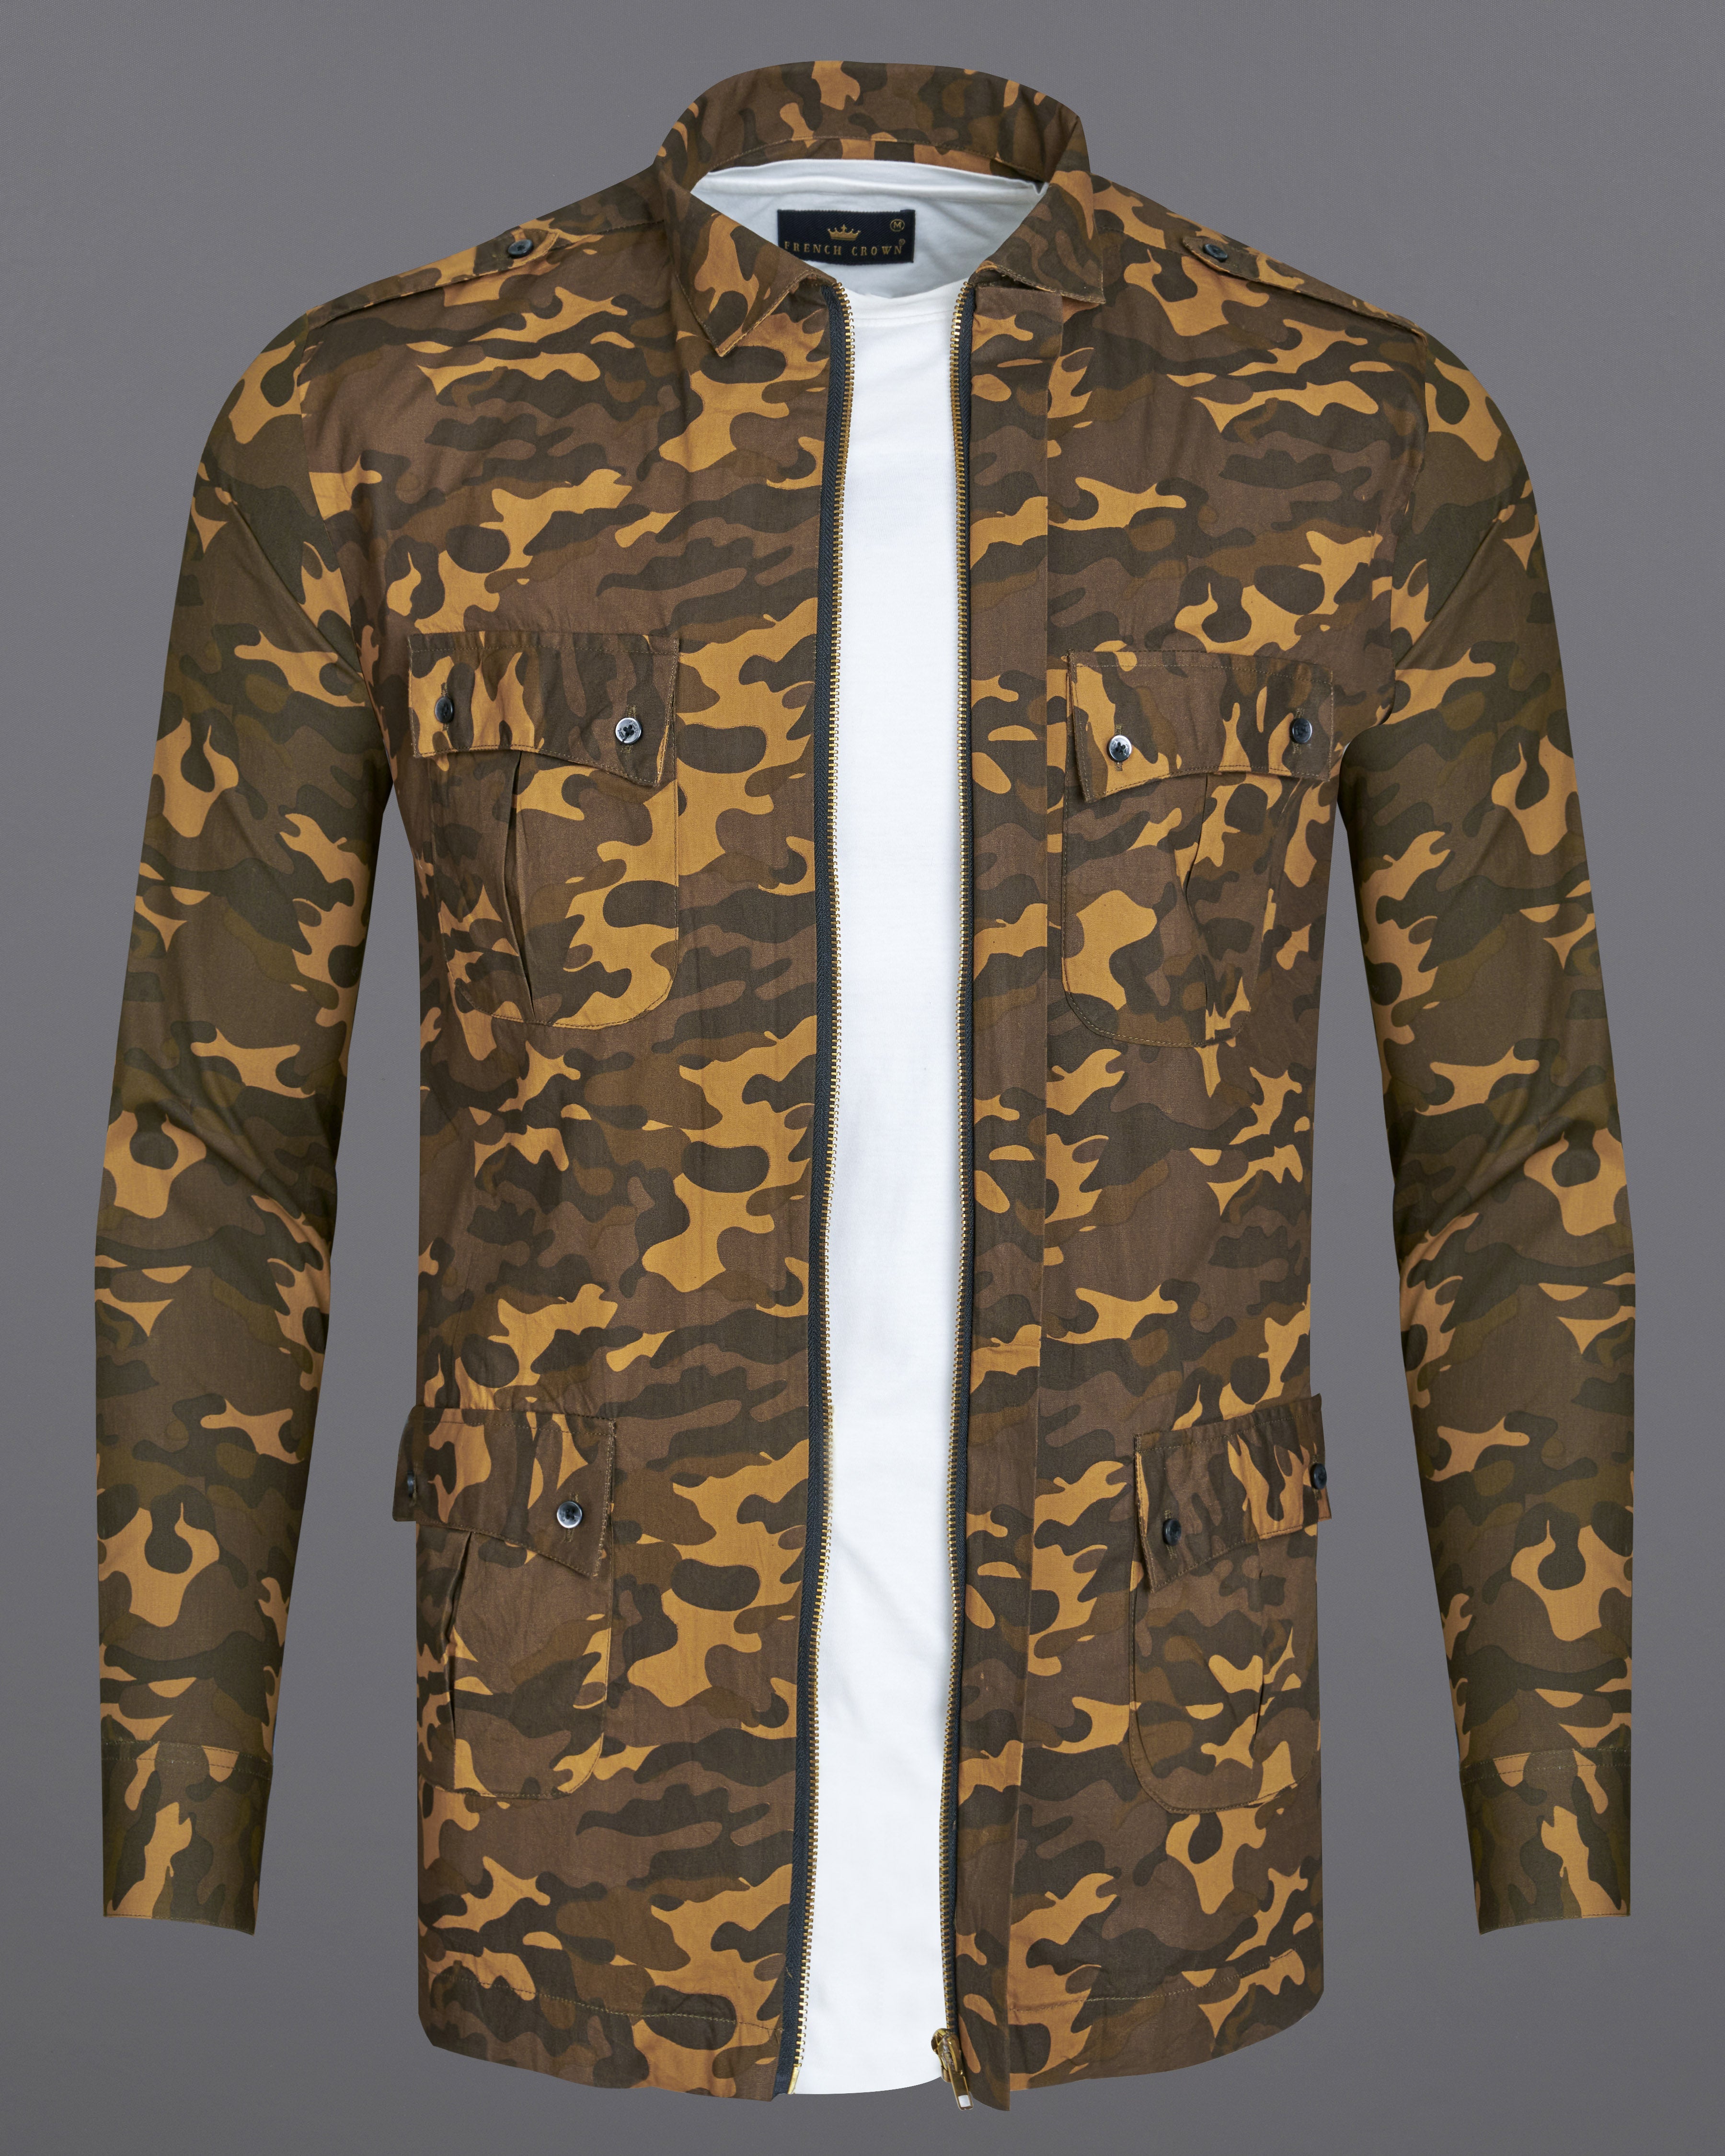 Taupe Brown with Birch Green Camouflage Royal Oxford Overshirt with Zipper Closure 9298-OS-ZP-P95-38,9298-OS-ZP-P95-H-38,9298-OS-ZP-P95-39,9298-OS-ZP-P95-H-39,9298-OS-ZP-P95-40,9298-OS-ZP-P95-H-40,9298-OS-ZP-P95-42,9298-OS-ZP-P95-H-42,9298-OS-ZP-P95-44,9298-OS-ZP-P95-H-44,9298-OS-ZP-P95-46,9298-OS-ZP-P95-H-46,9298-OS-ZP-P95-48,9298-OS-ZP-P95-H-48,9298-OS-ZP-P95-50,9298-OS-ZP-P95-H-50,9298-OS-ZP-P95-52,9298-OS-ZP-P95-H-52